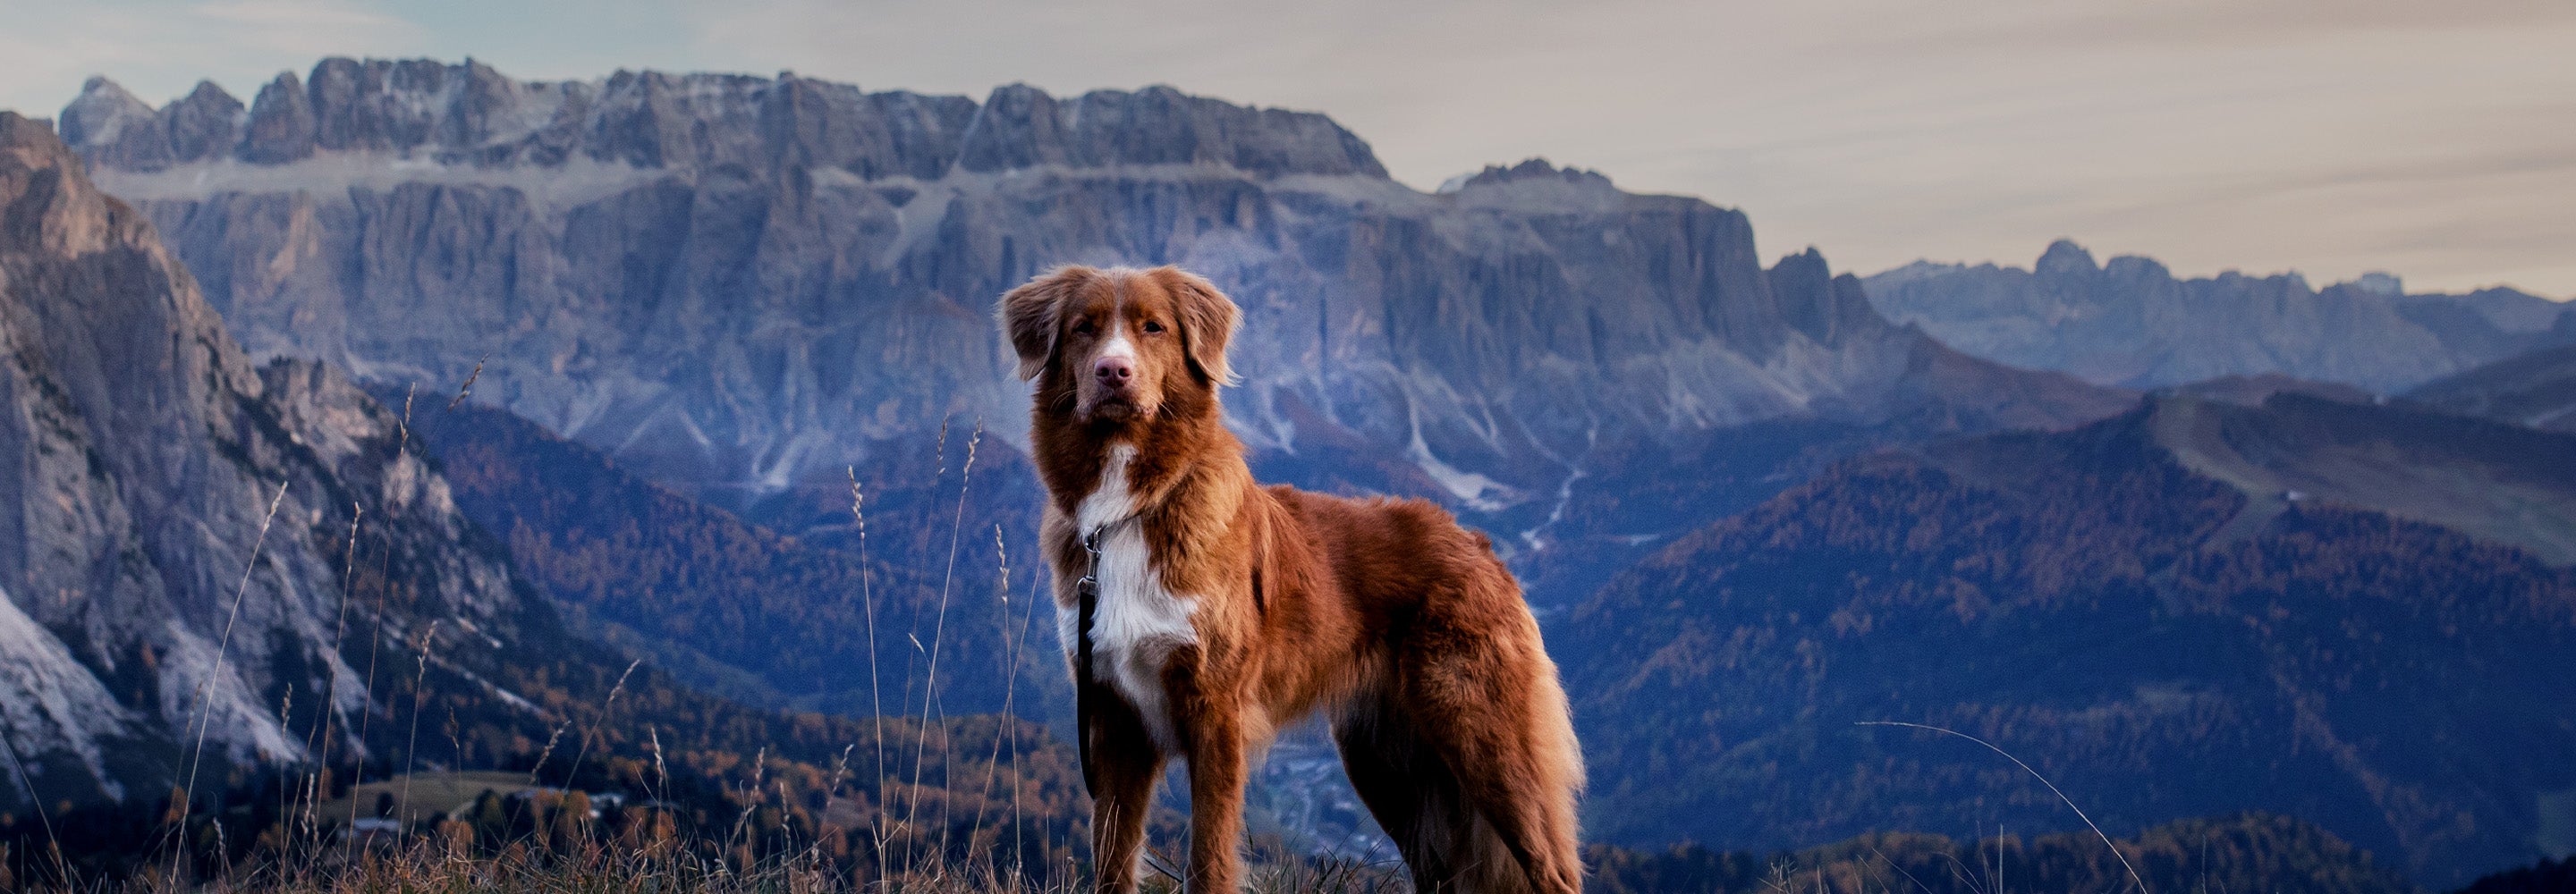 A brown dog with a white chest in a mountainous region during dusk or dawn.